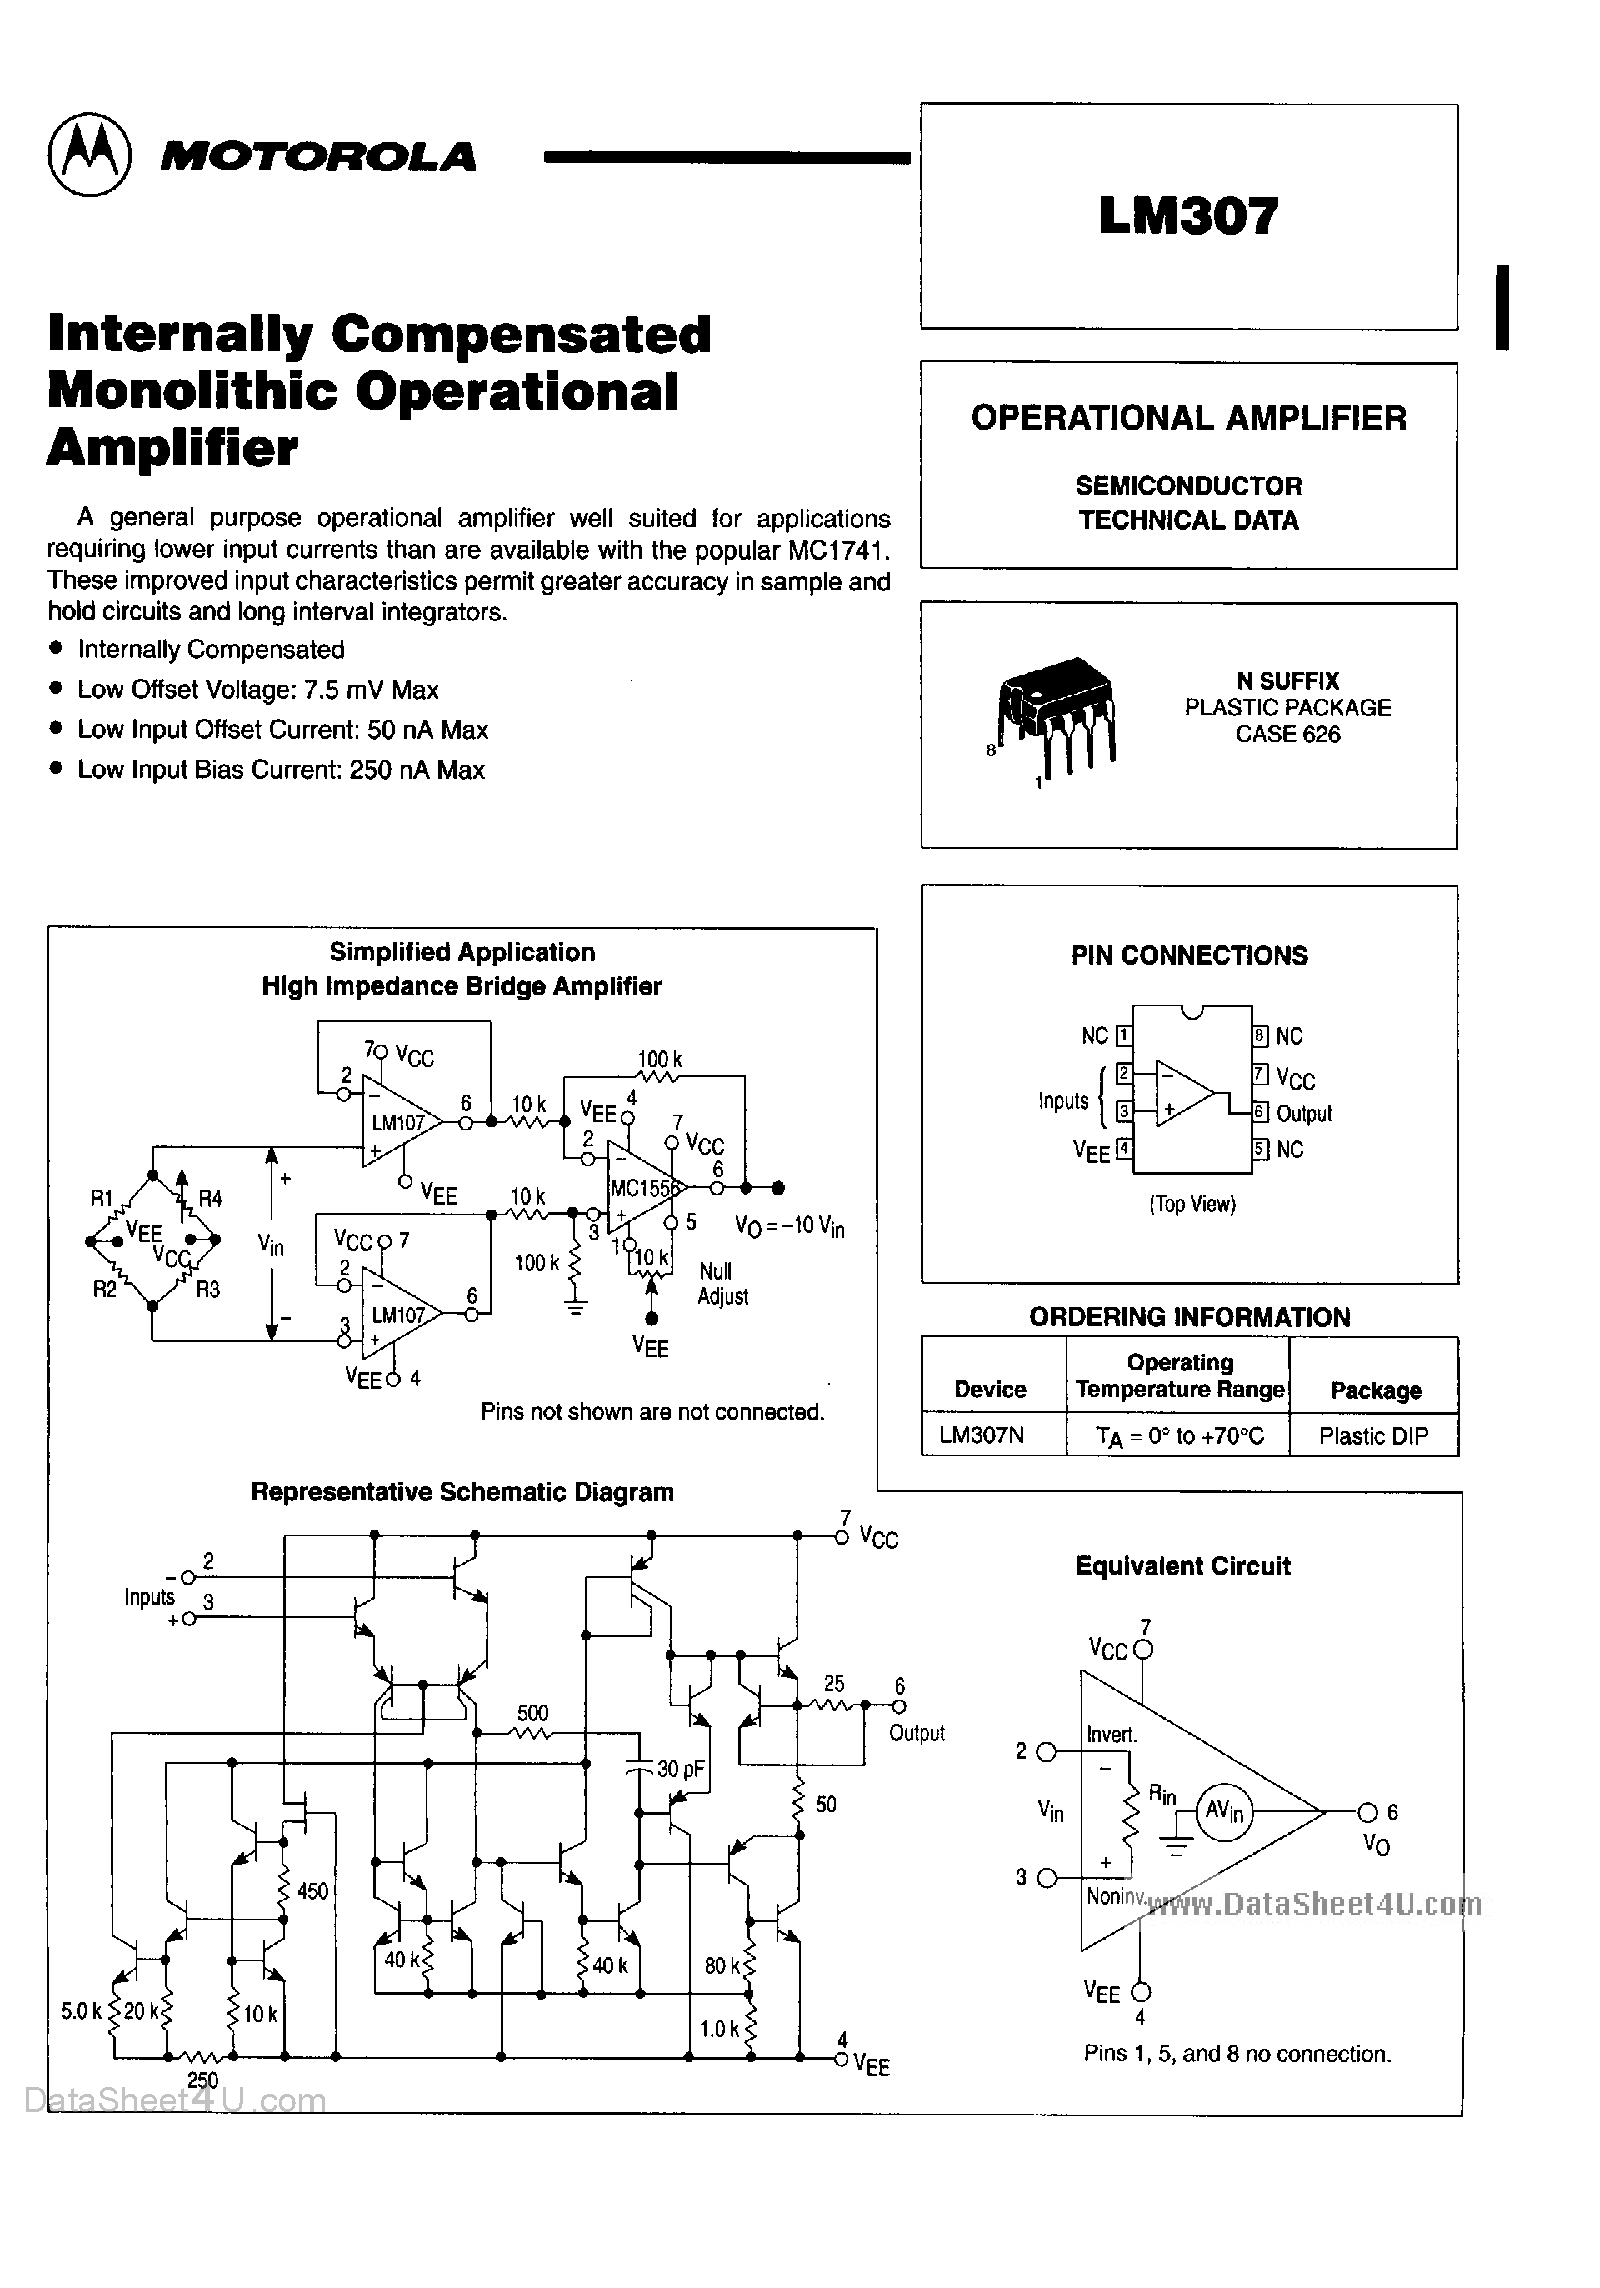 Даташит MLM307 - Interna;;y Compensated Monolithic Operational Amplifier страница 1